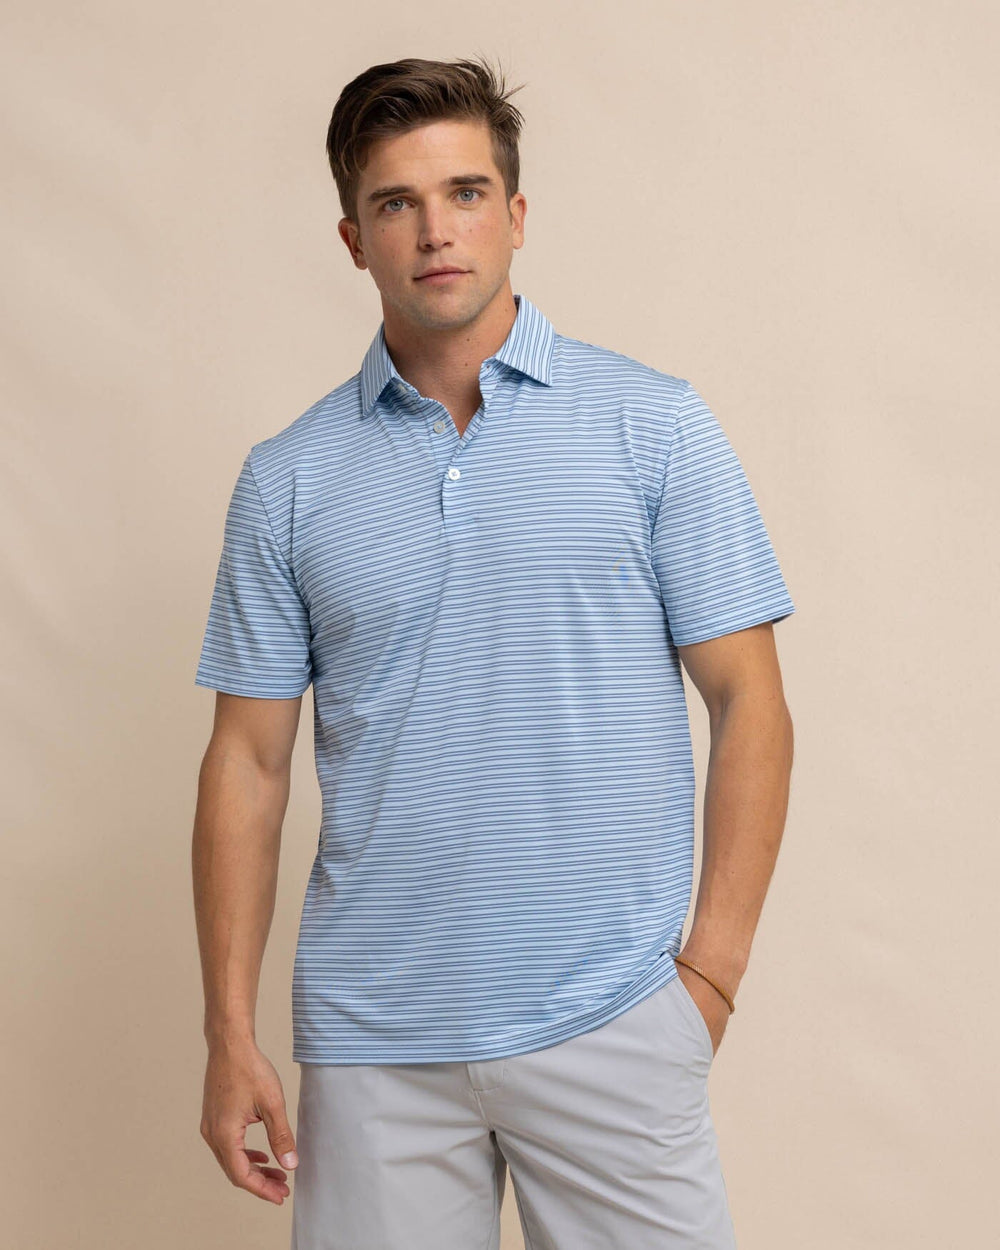 The front view of the Southern Tide Driver Baywoods Stripe Polo by Southern Tide - Clearwater Blue